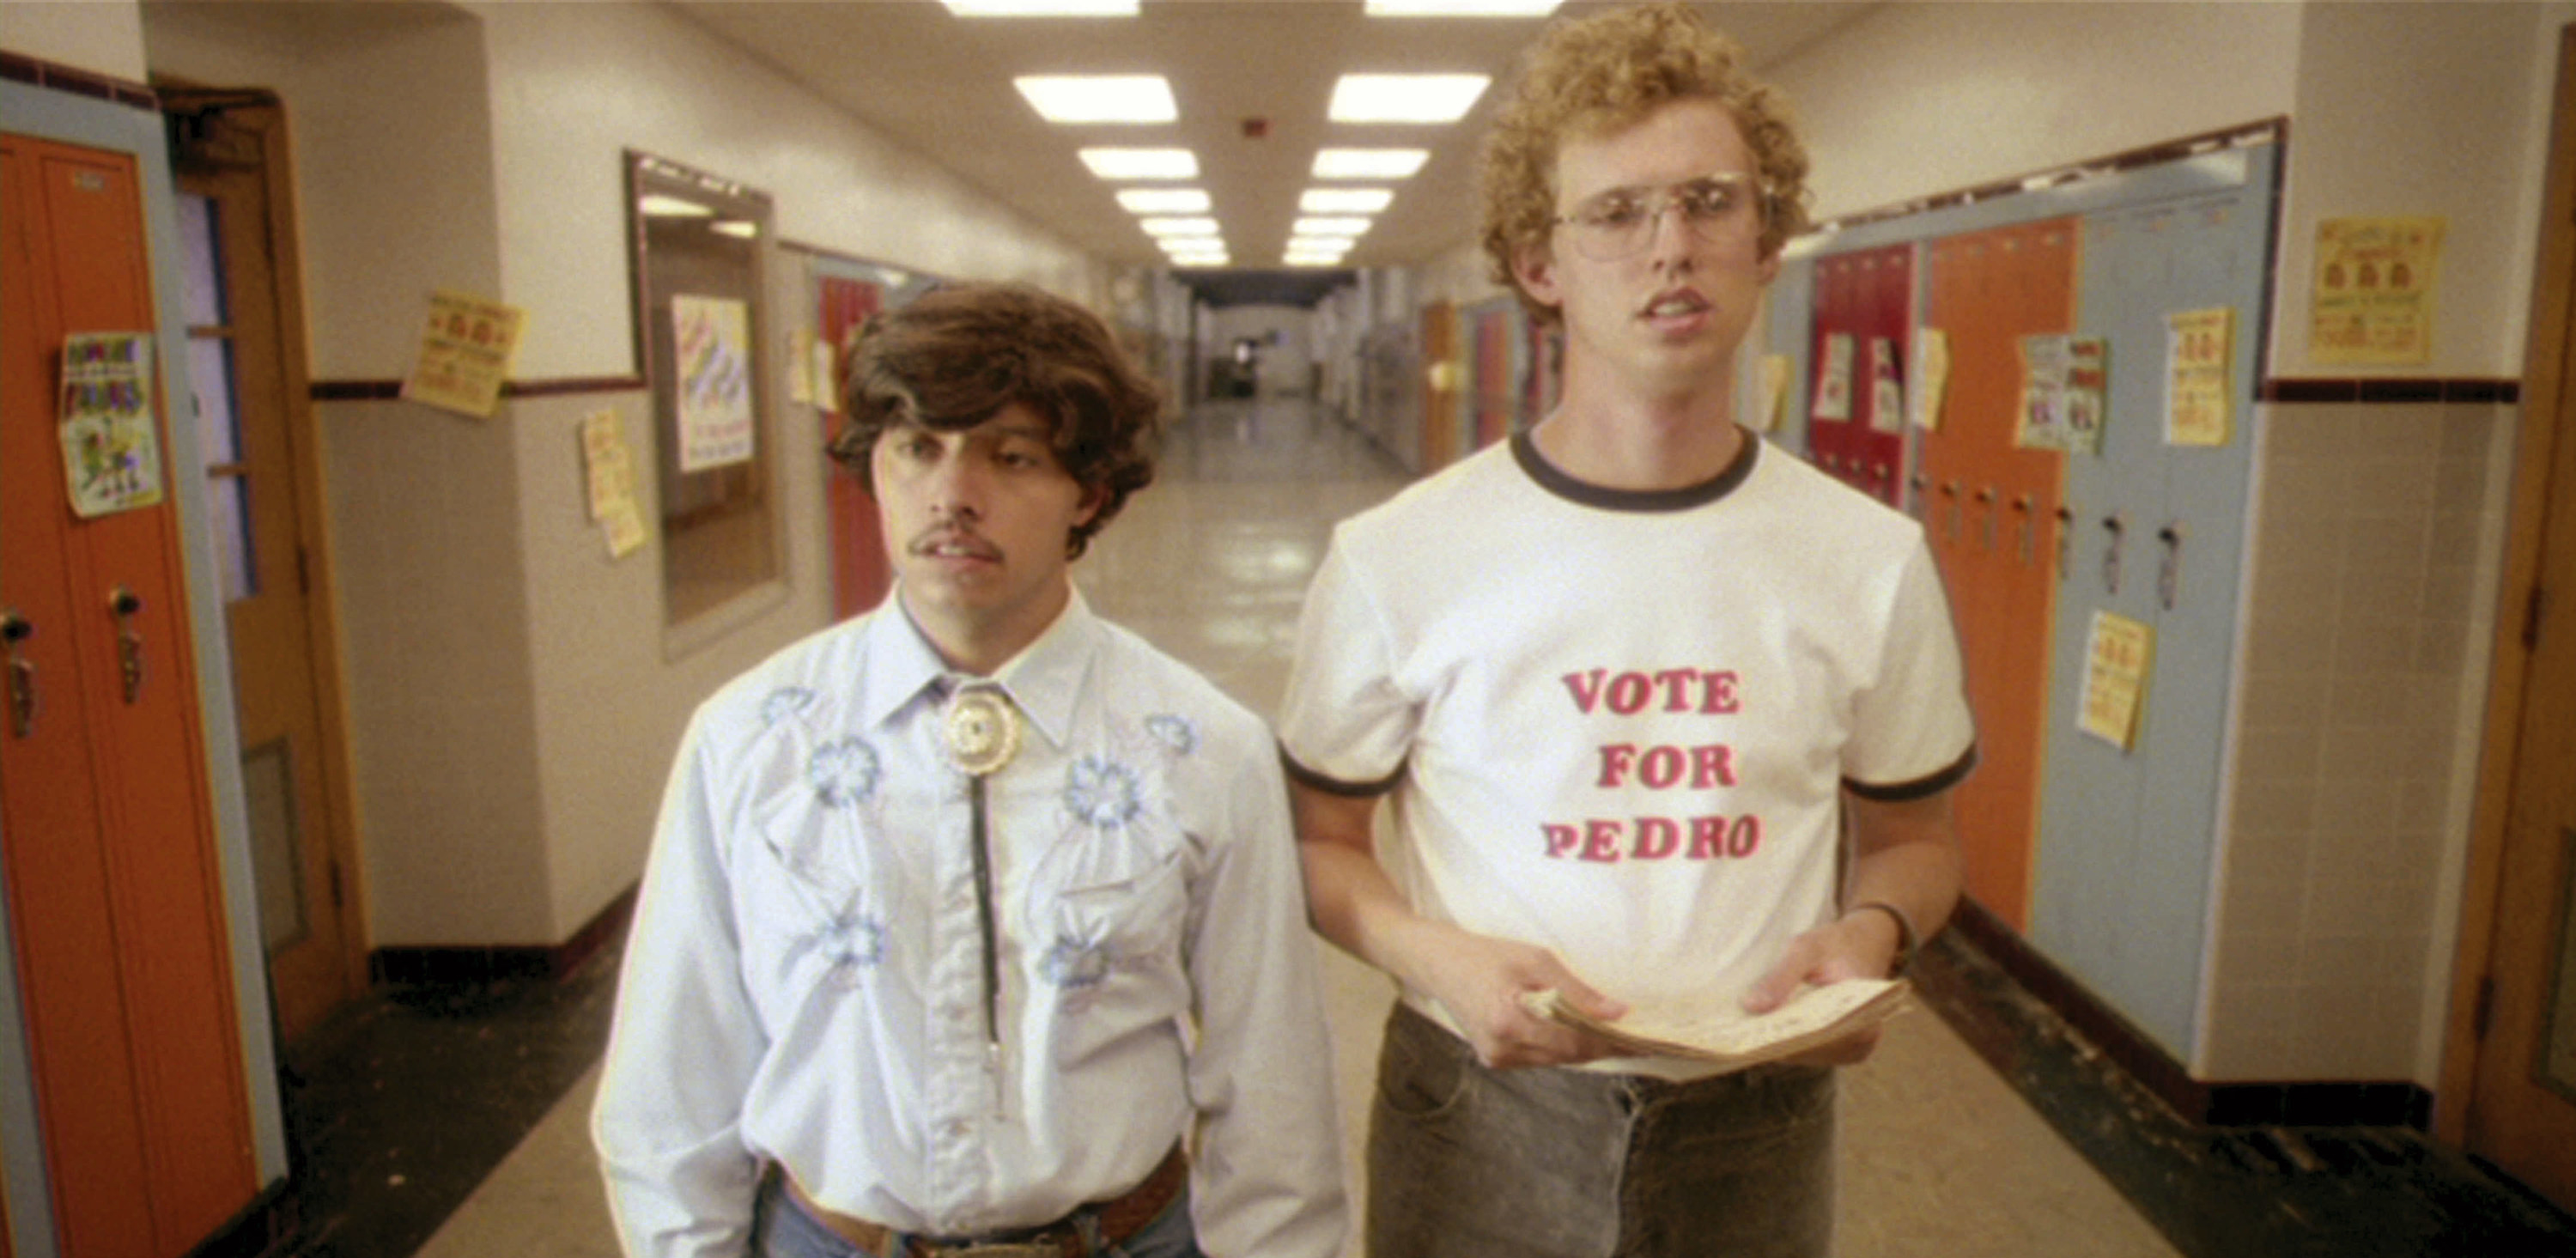 Two students stand in a hallway, one wearing a &#x27;Vote for Pedro&quot; shirt